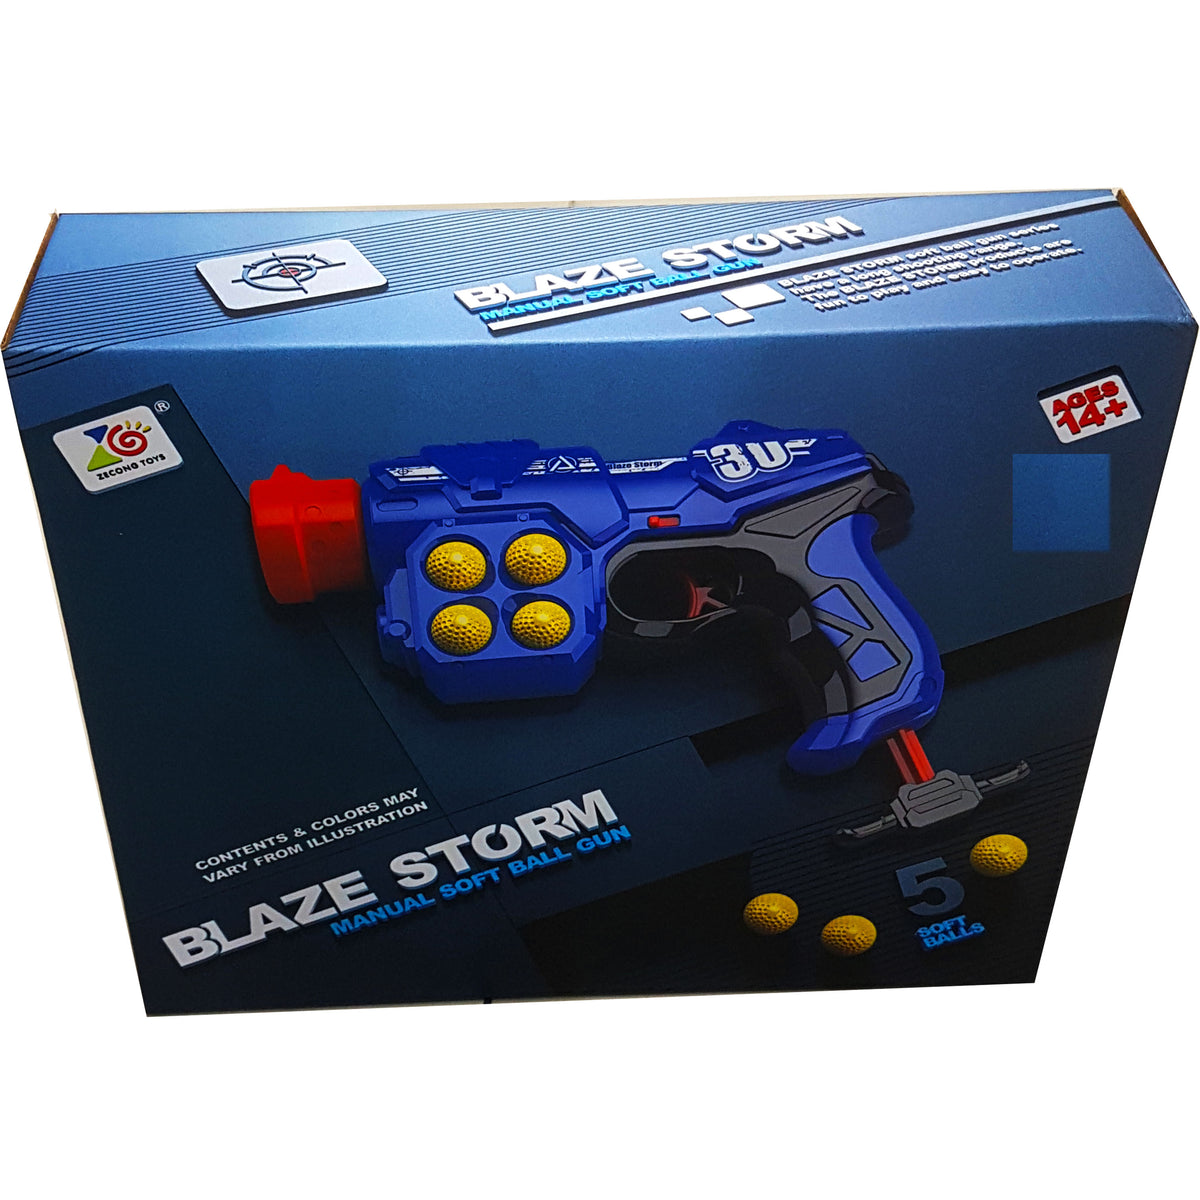 Blaze Storm Manual Soft Bullet Gun - New Arrival Spring-Action Toy for Boys with 5 Soft Balls - High Velocity, Accurate and Safe - Ideal Gift for Kids